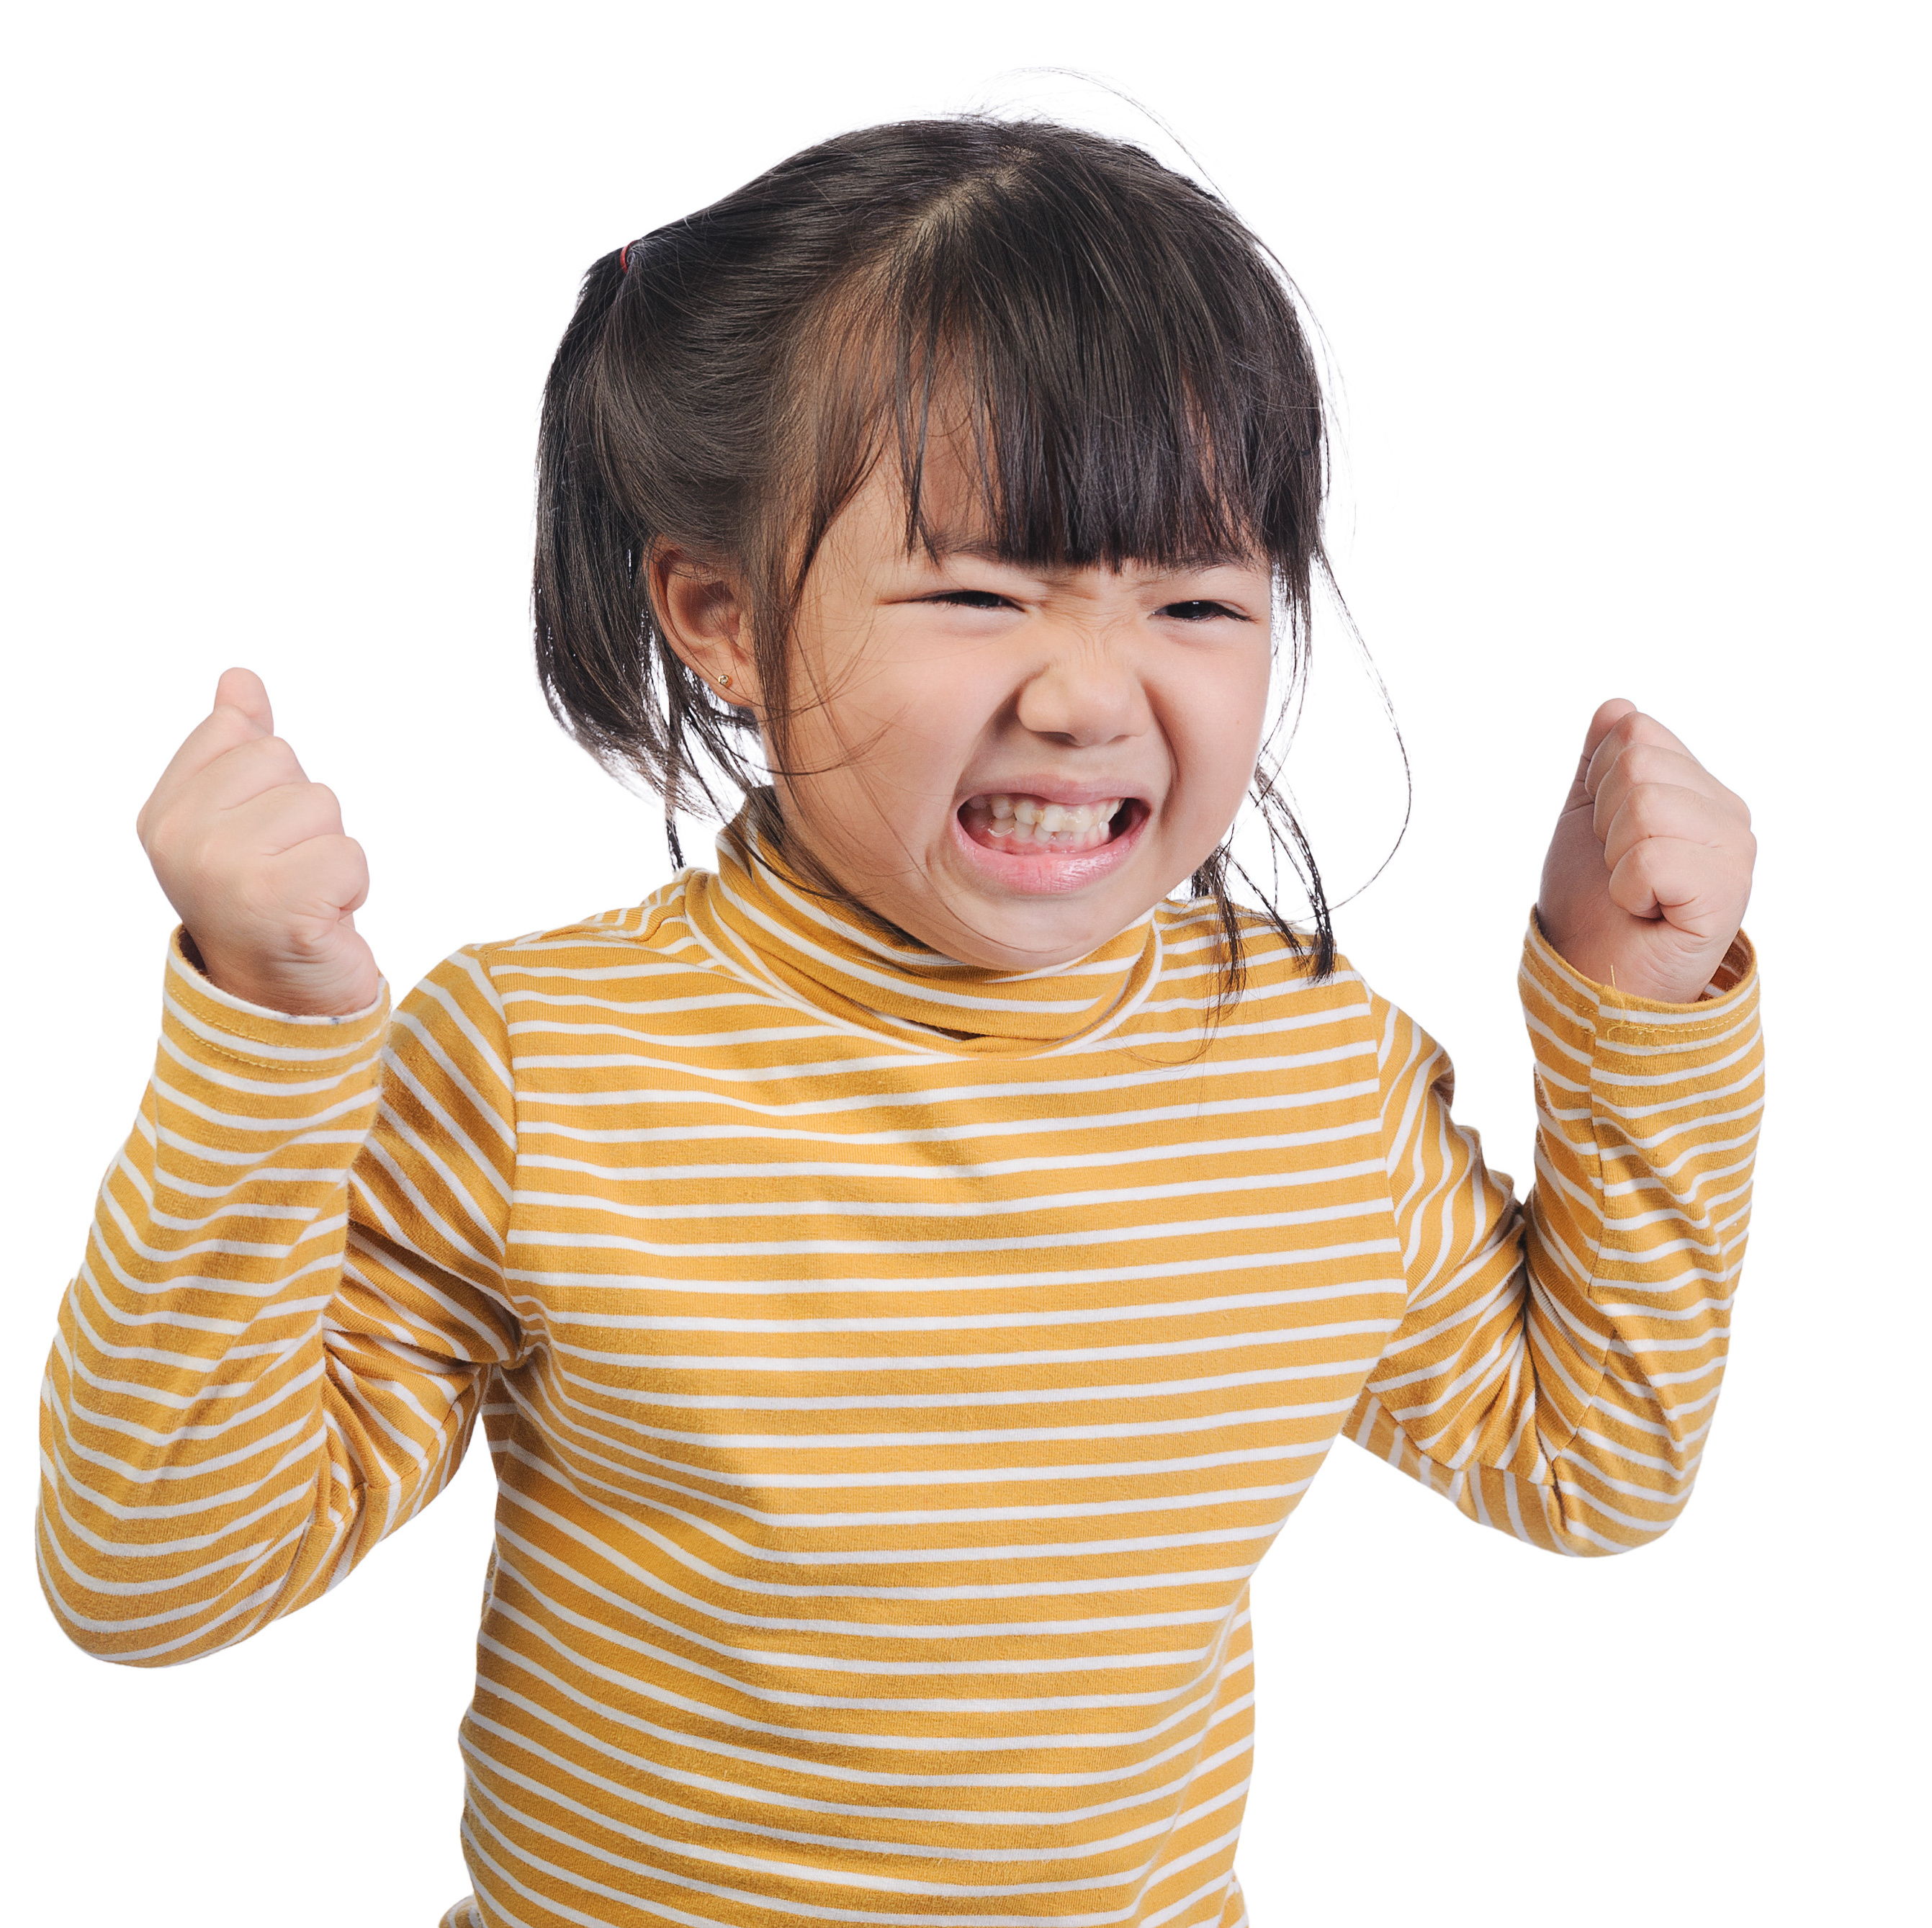 10 Tips To Help Your Child With Anger